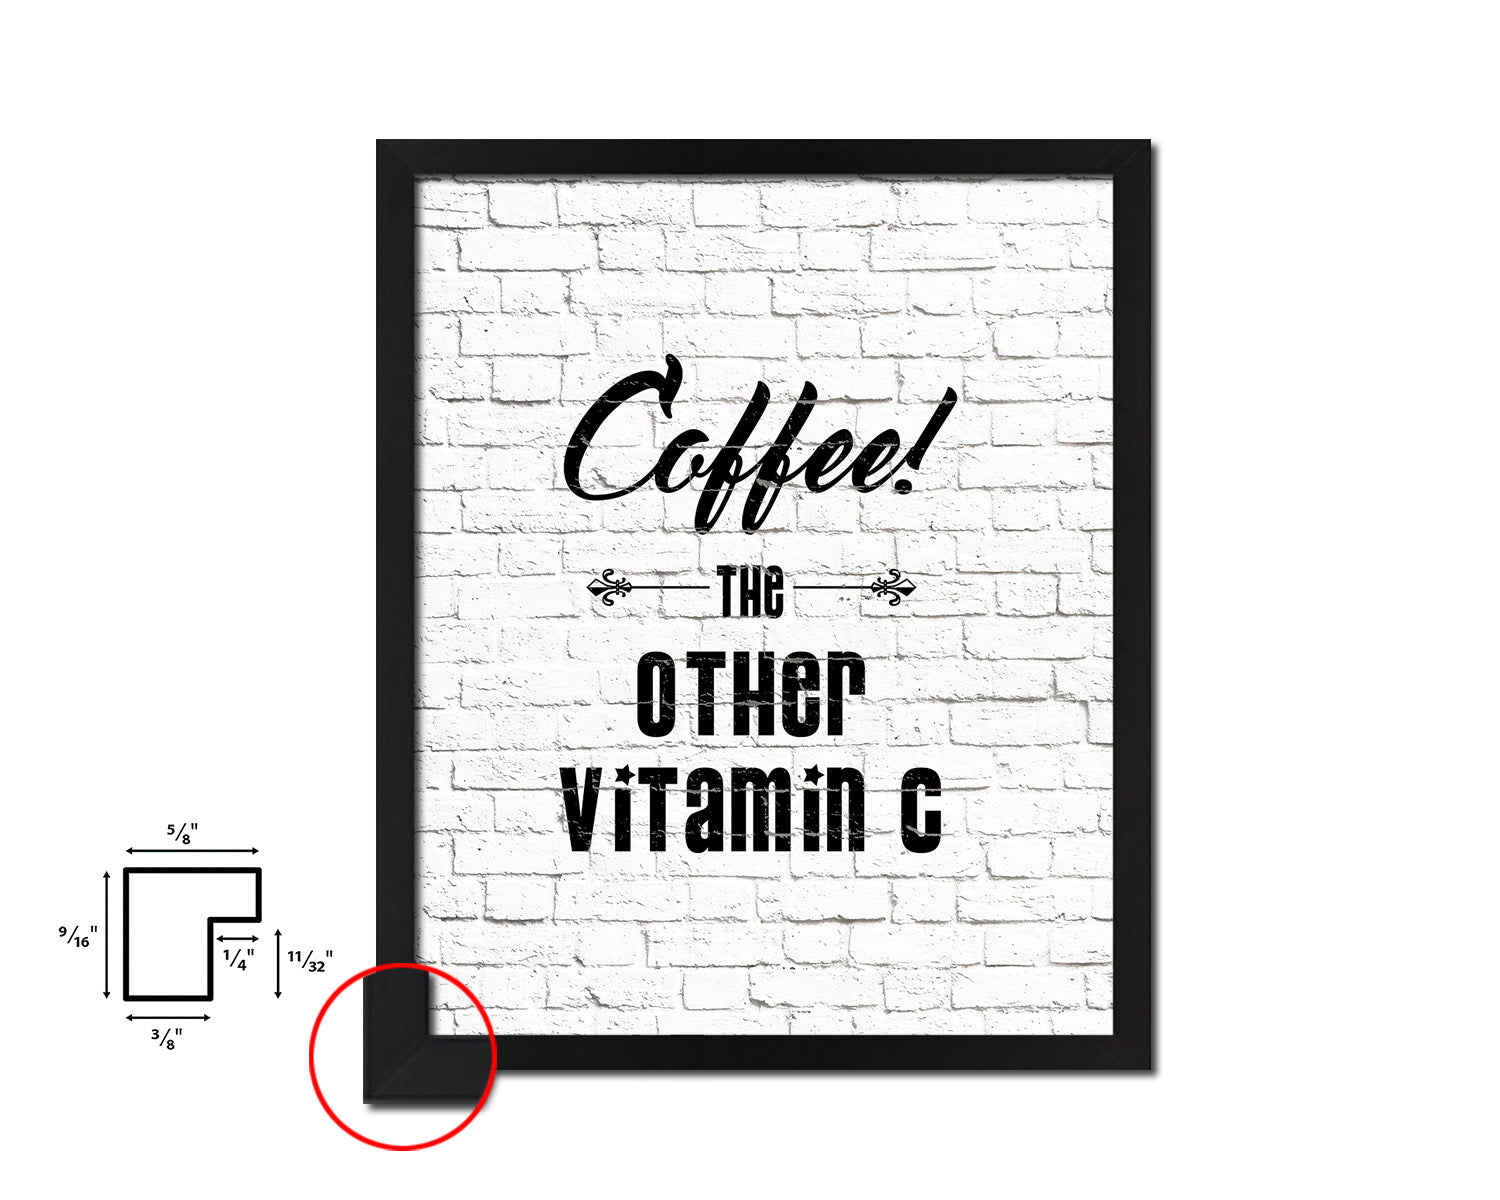 Coffee the other vitamin C Quote Framed Artwork Print Wall Decor Art Gifts